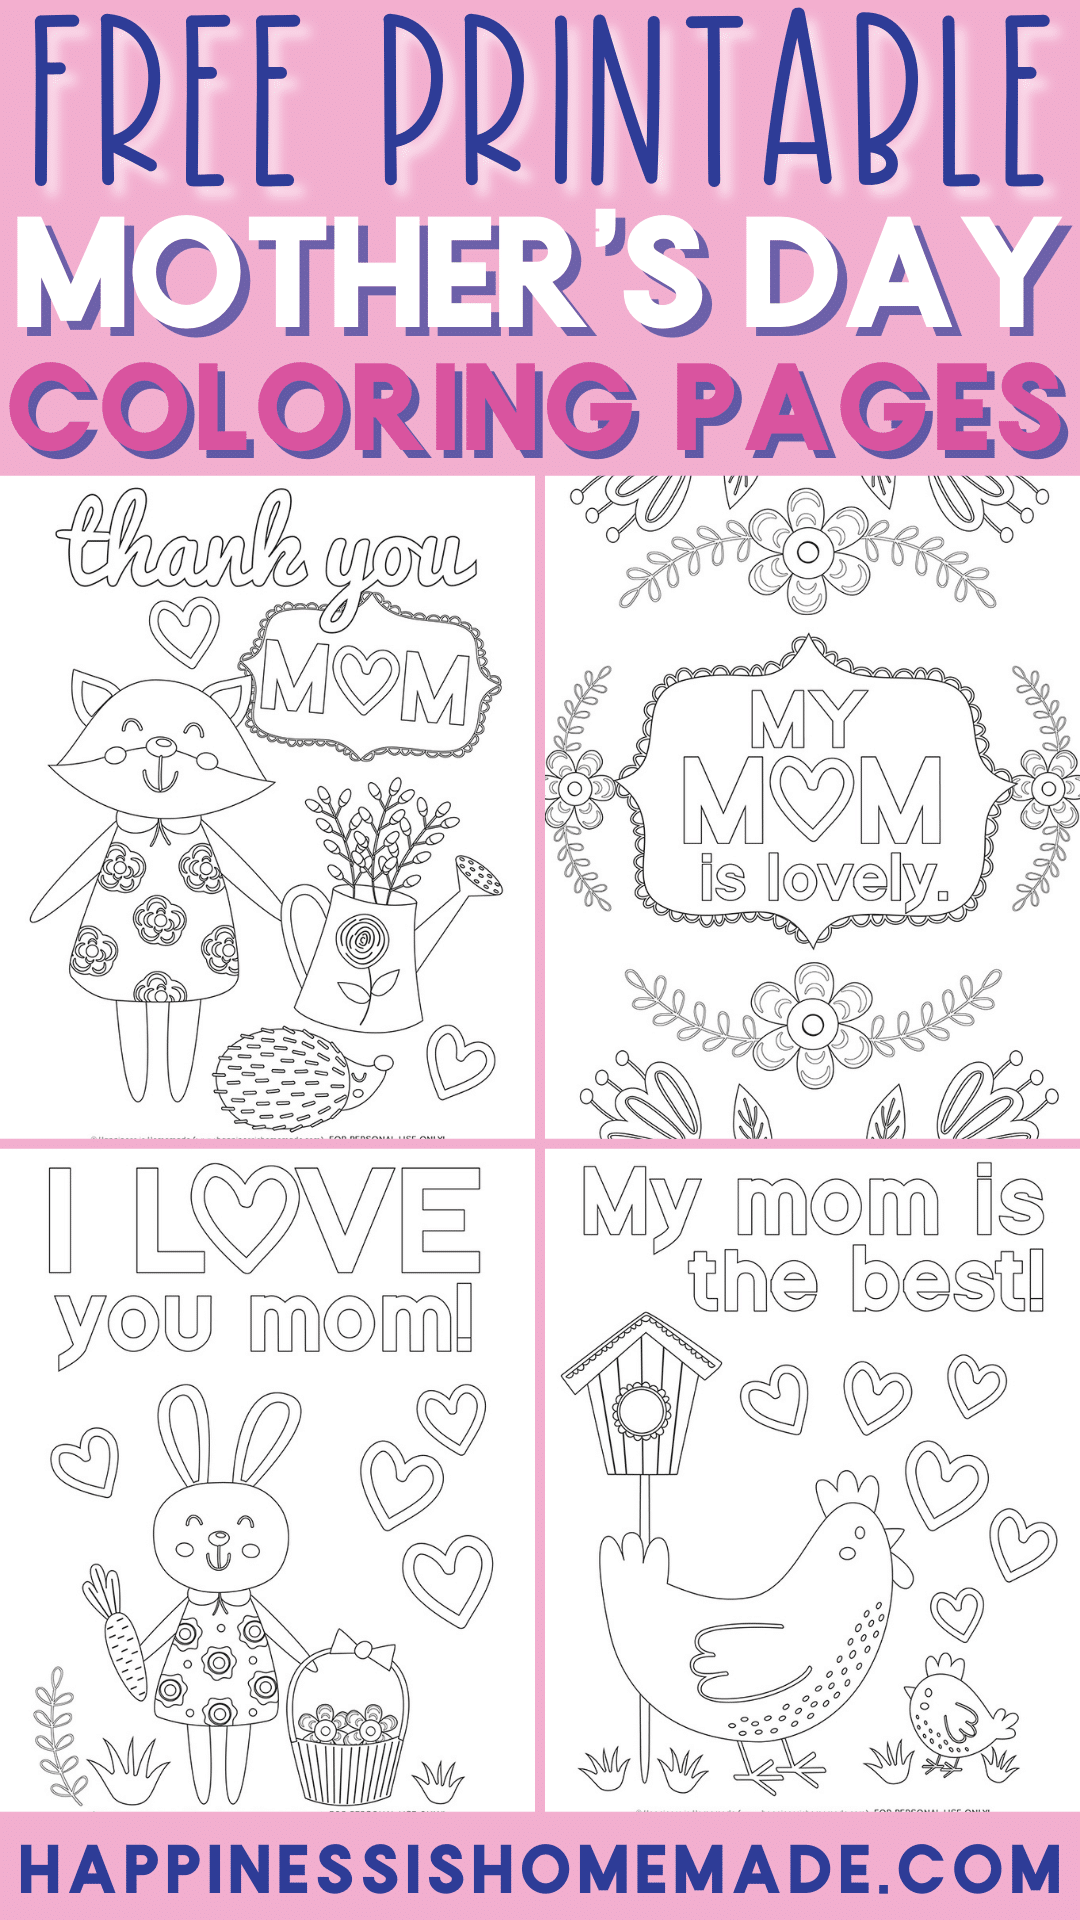 https://www.happinessishomemade.net/wp-content/uploads/2019/04/Free-Printable-Mothers-Day-Coloring-Pages-Pin.png